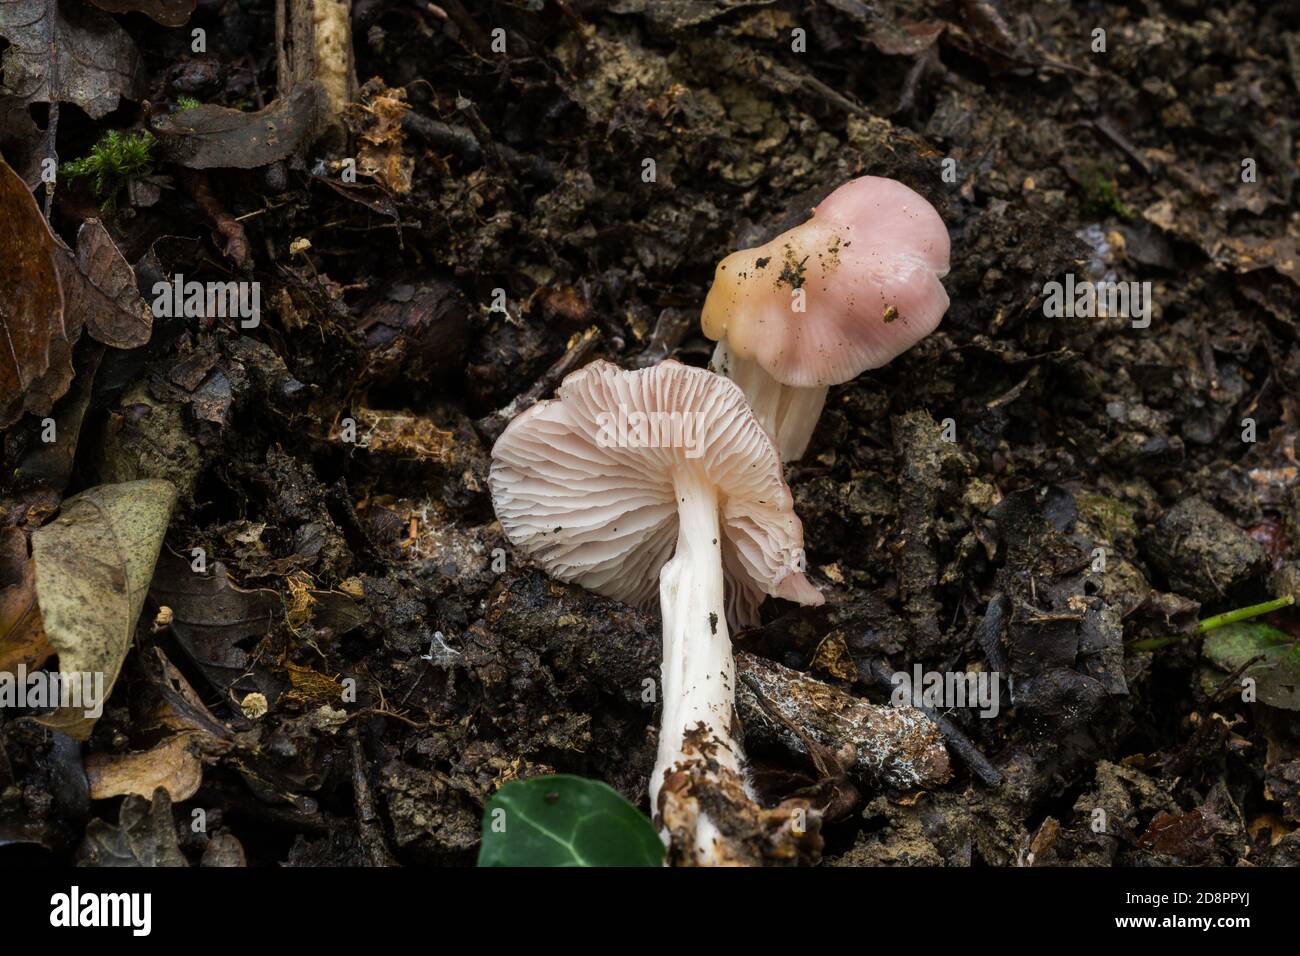 The cap and stem of what is possibly a young 'sickner' or the Russula emetica mushroom. Stock Photo